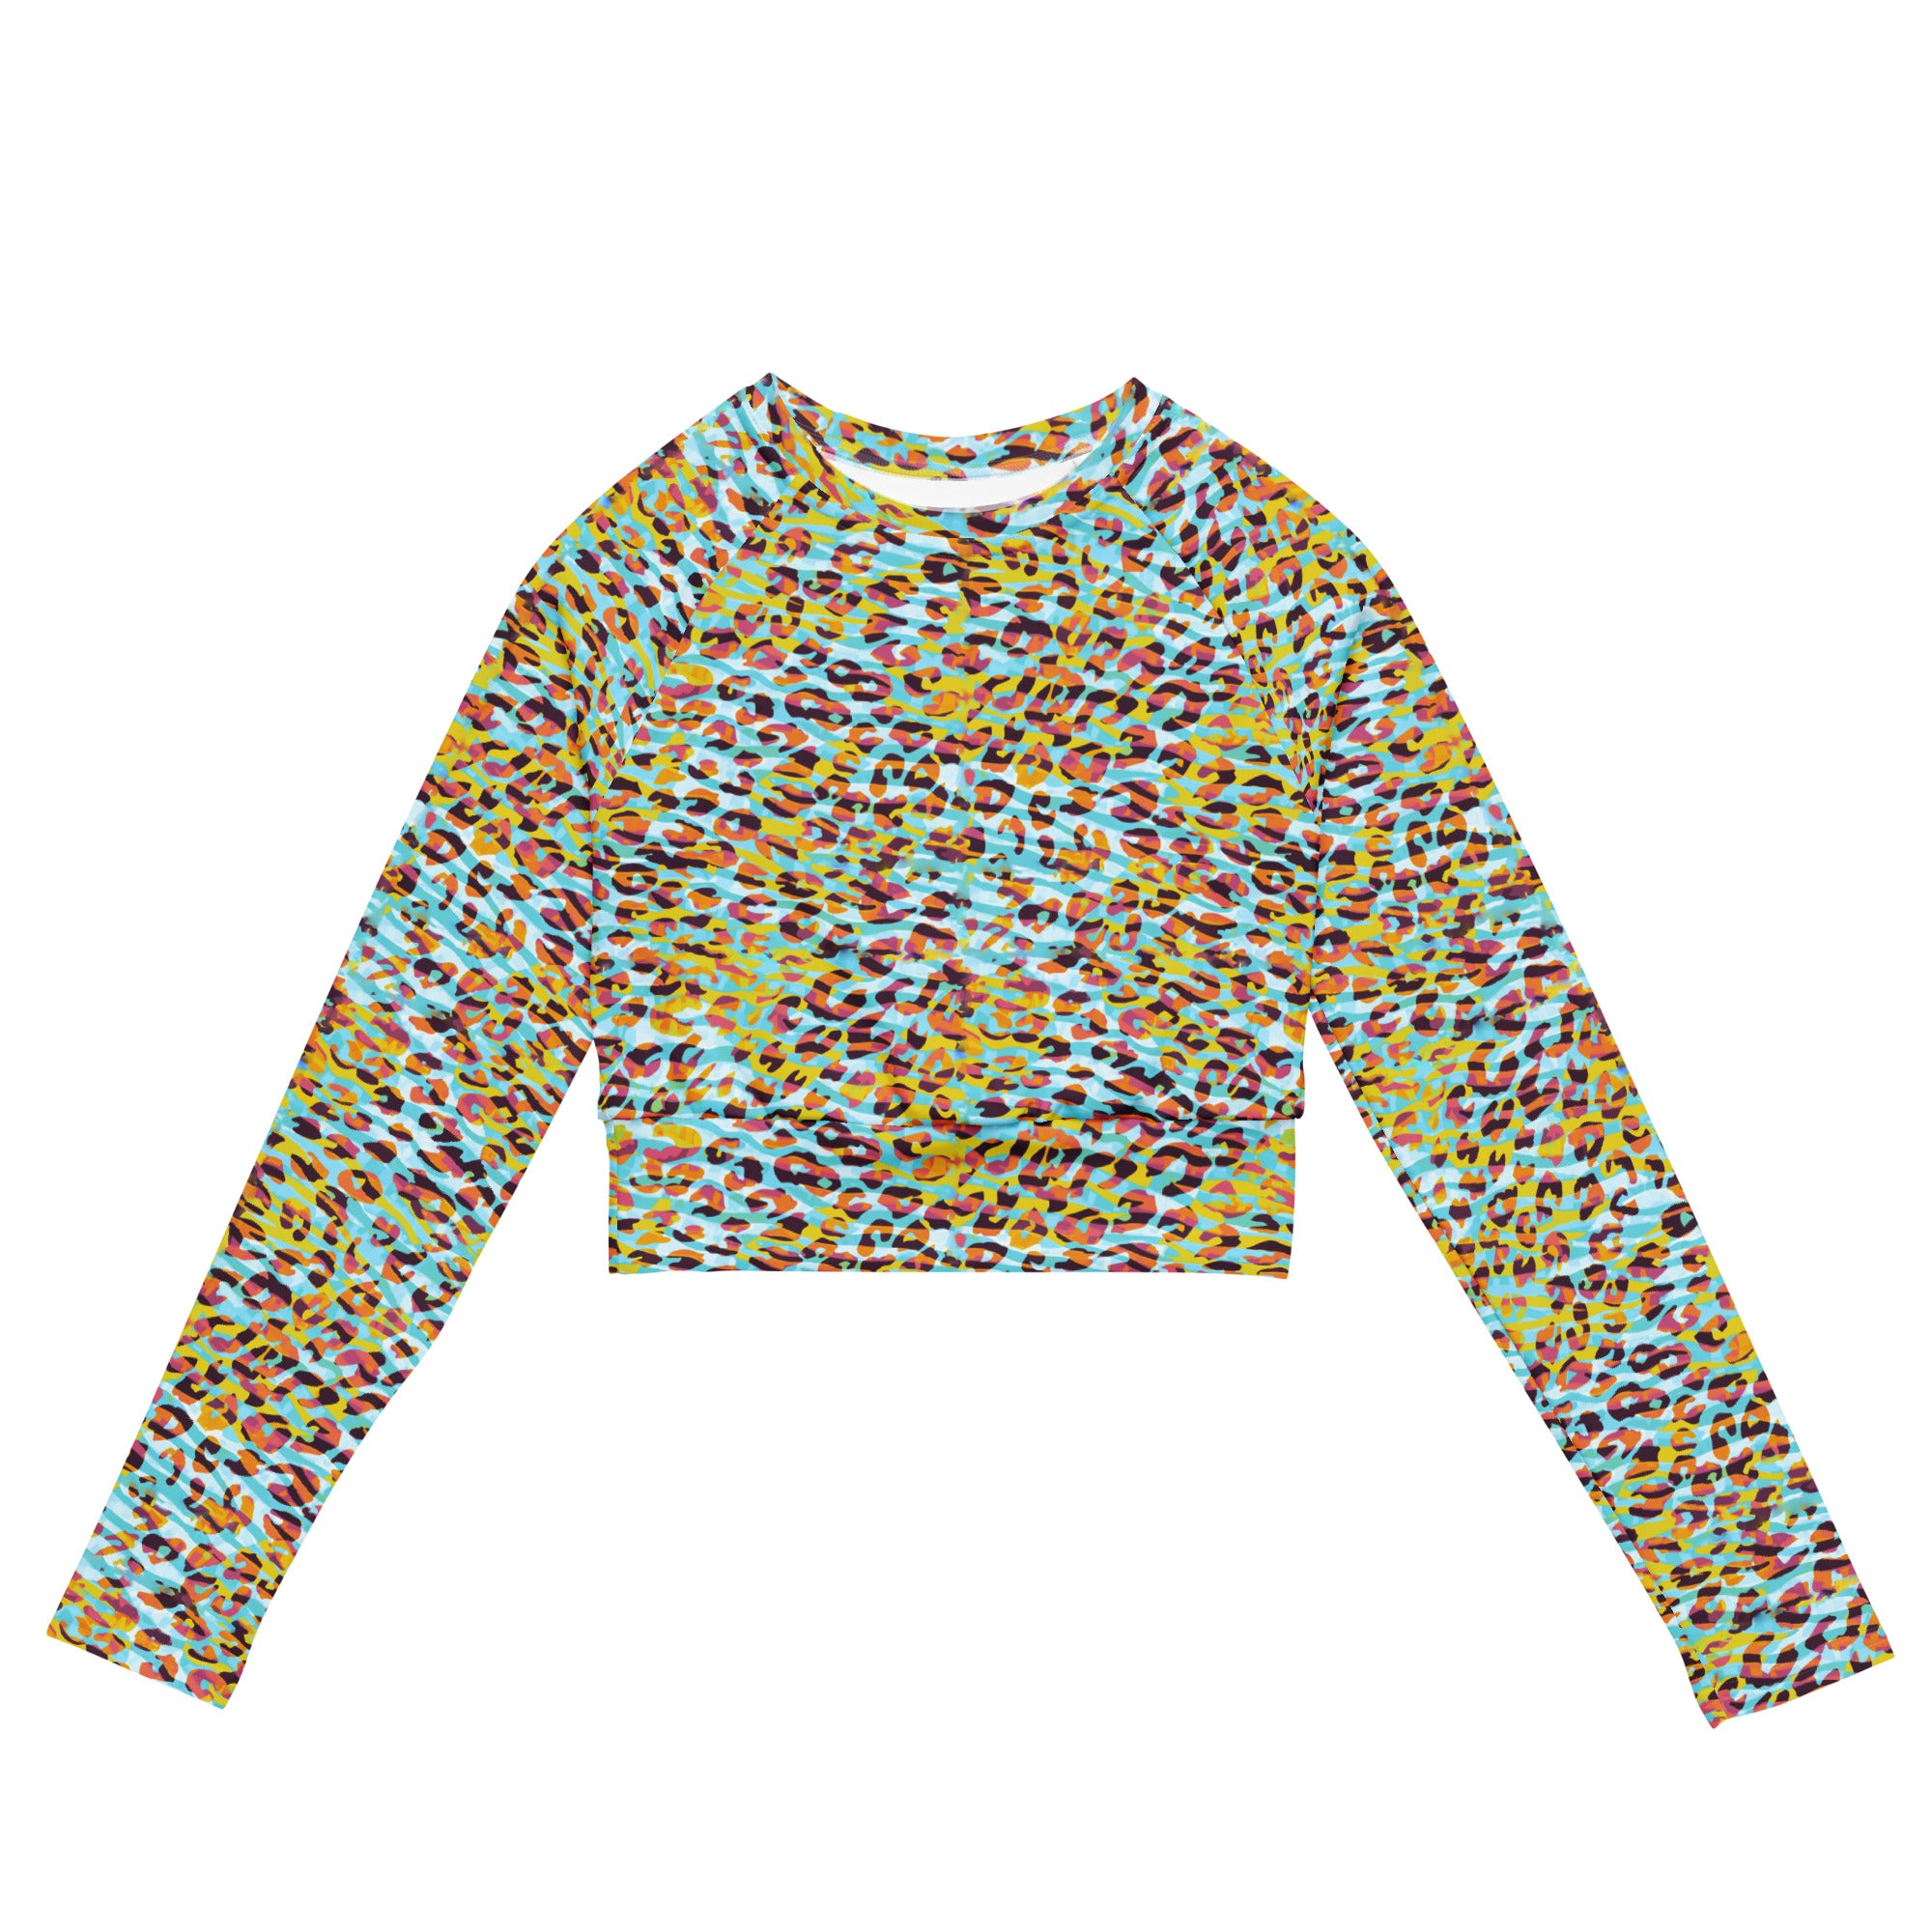 long-sleeve crop top- Zebra and Leopard print cyan with yellow